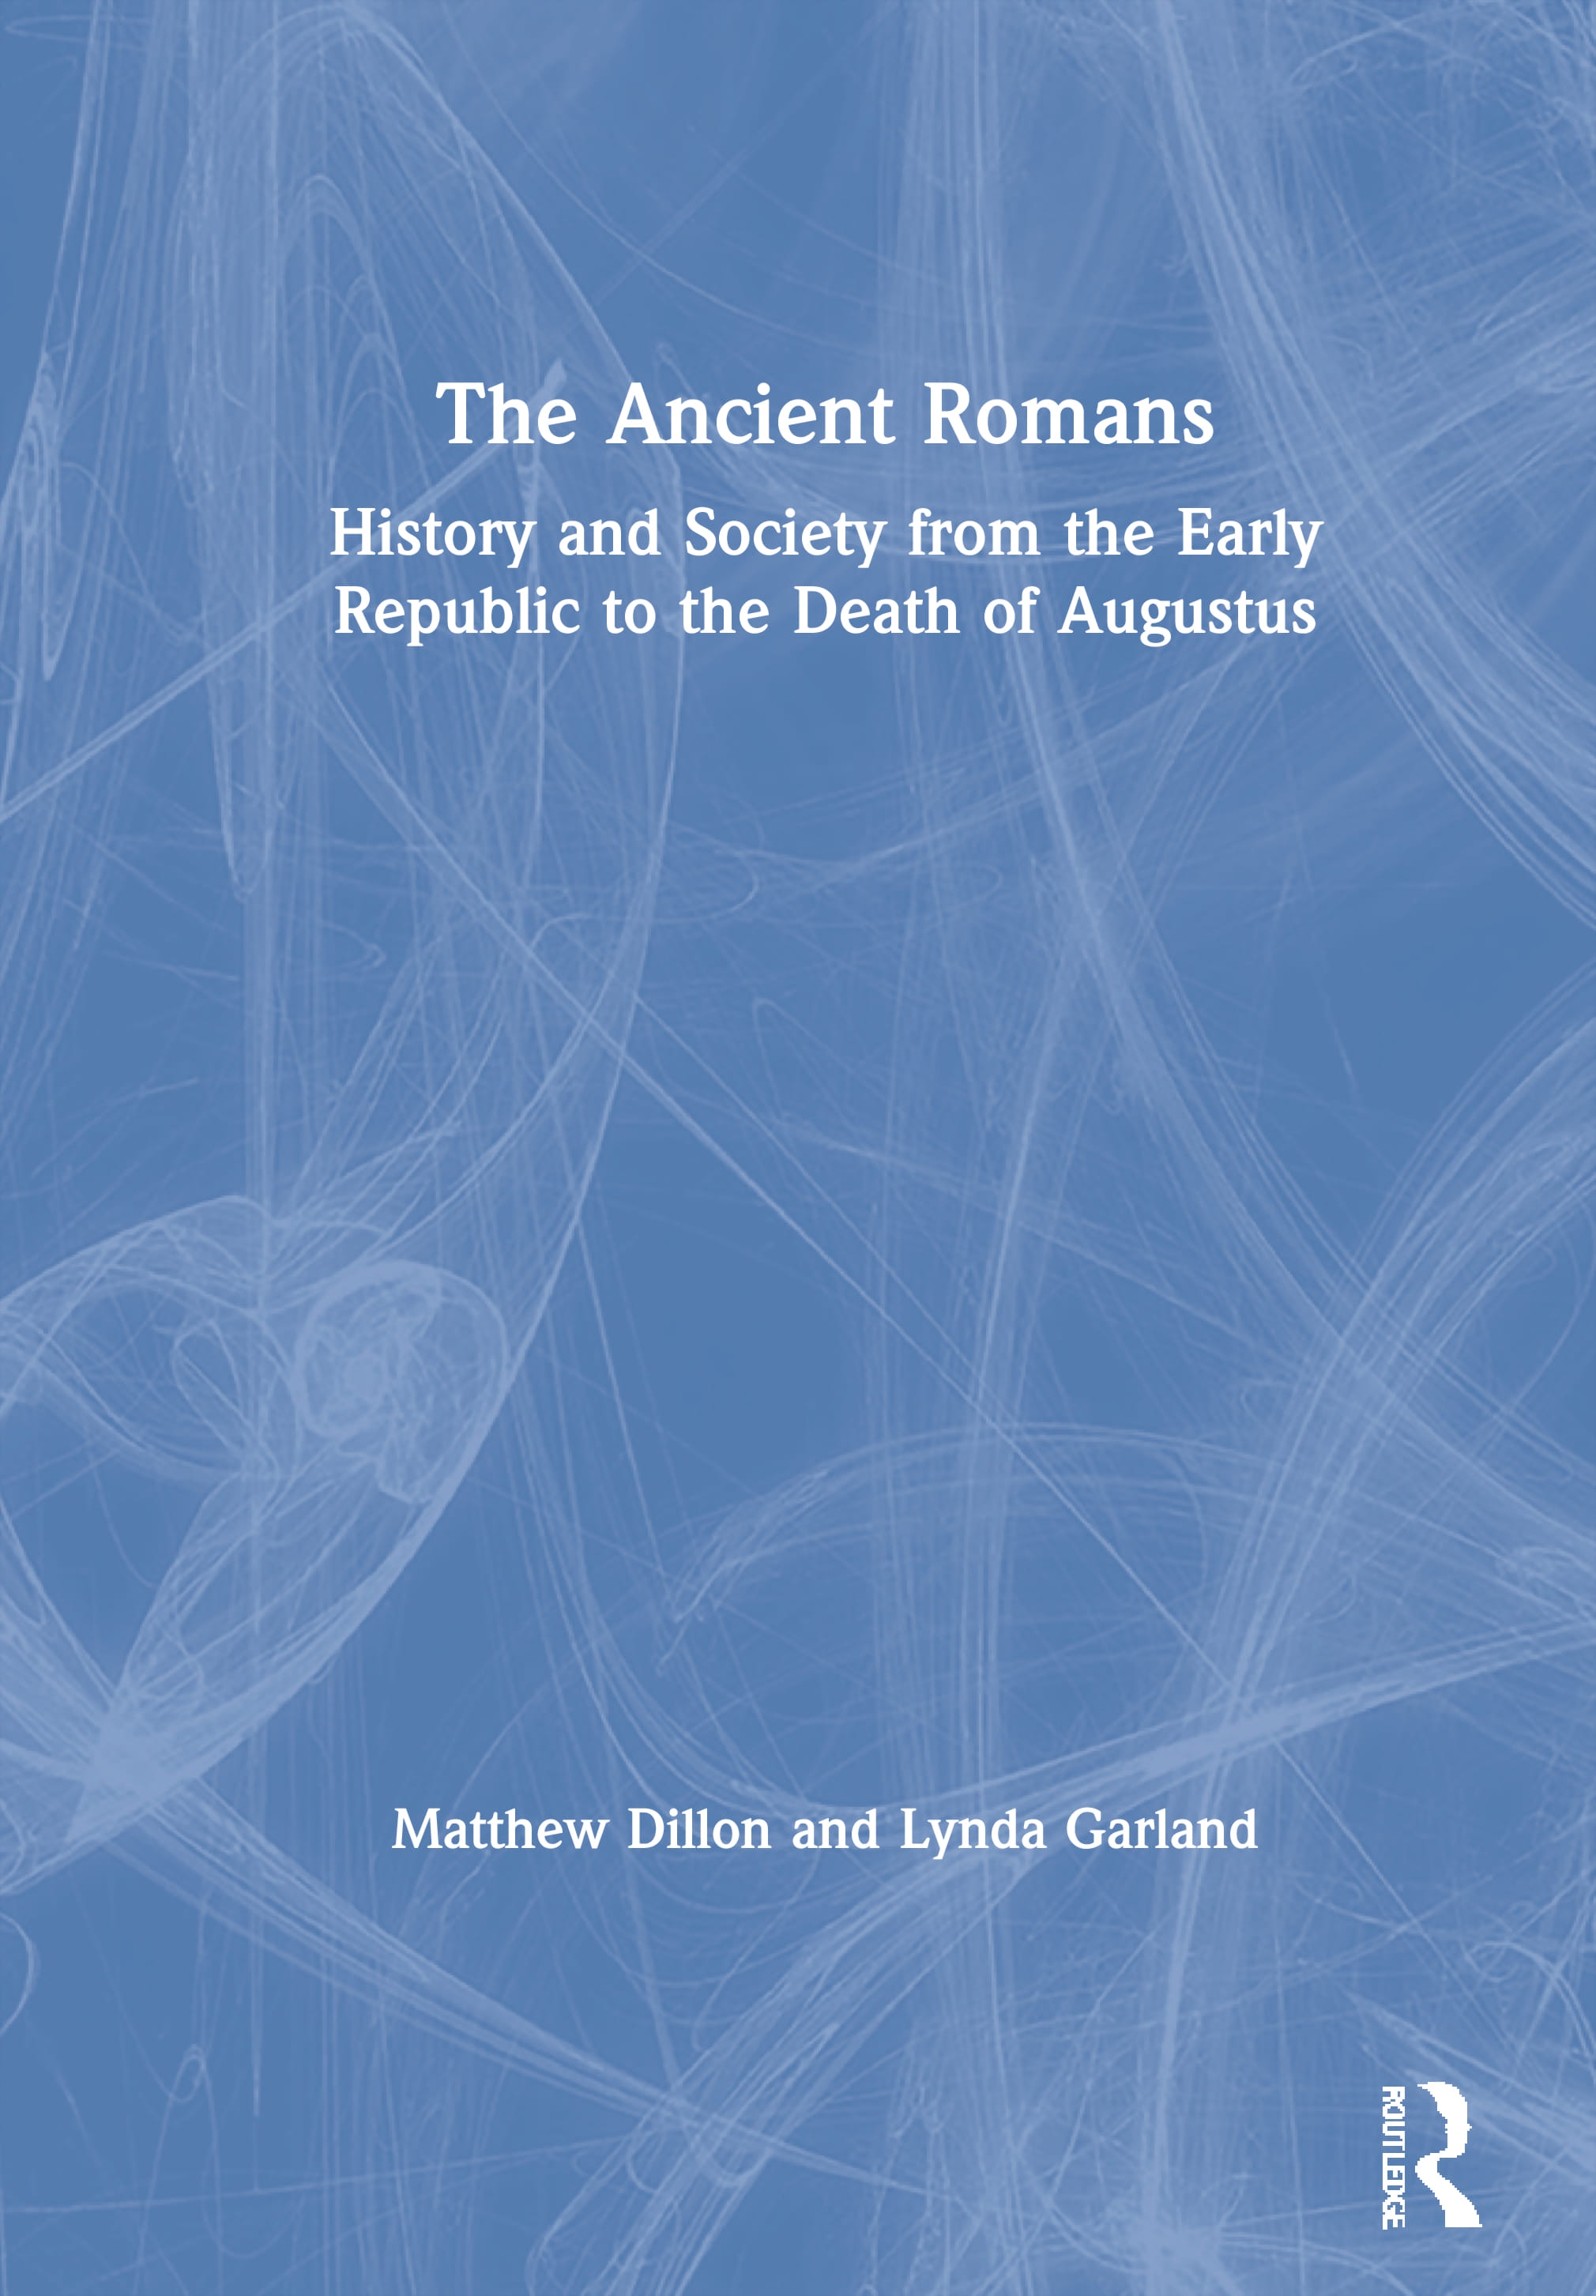 The Ancient Romans: A Social and Political History from the Early Republic to the Death of Augustus